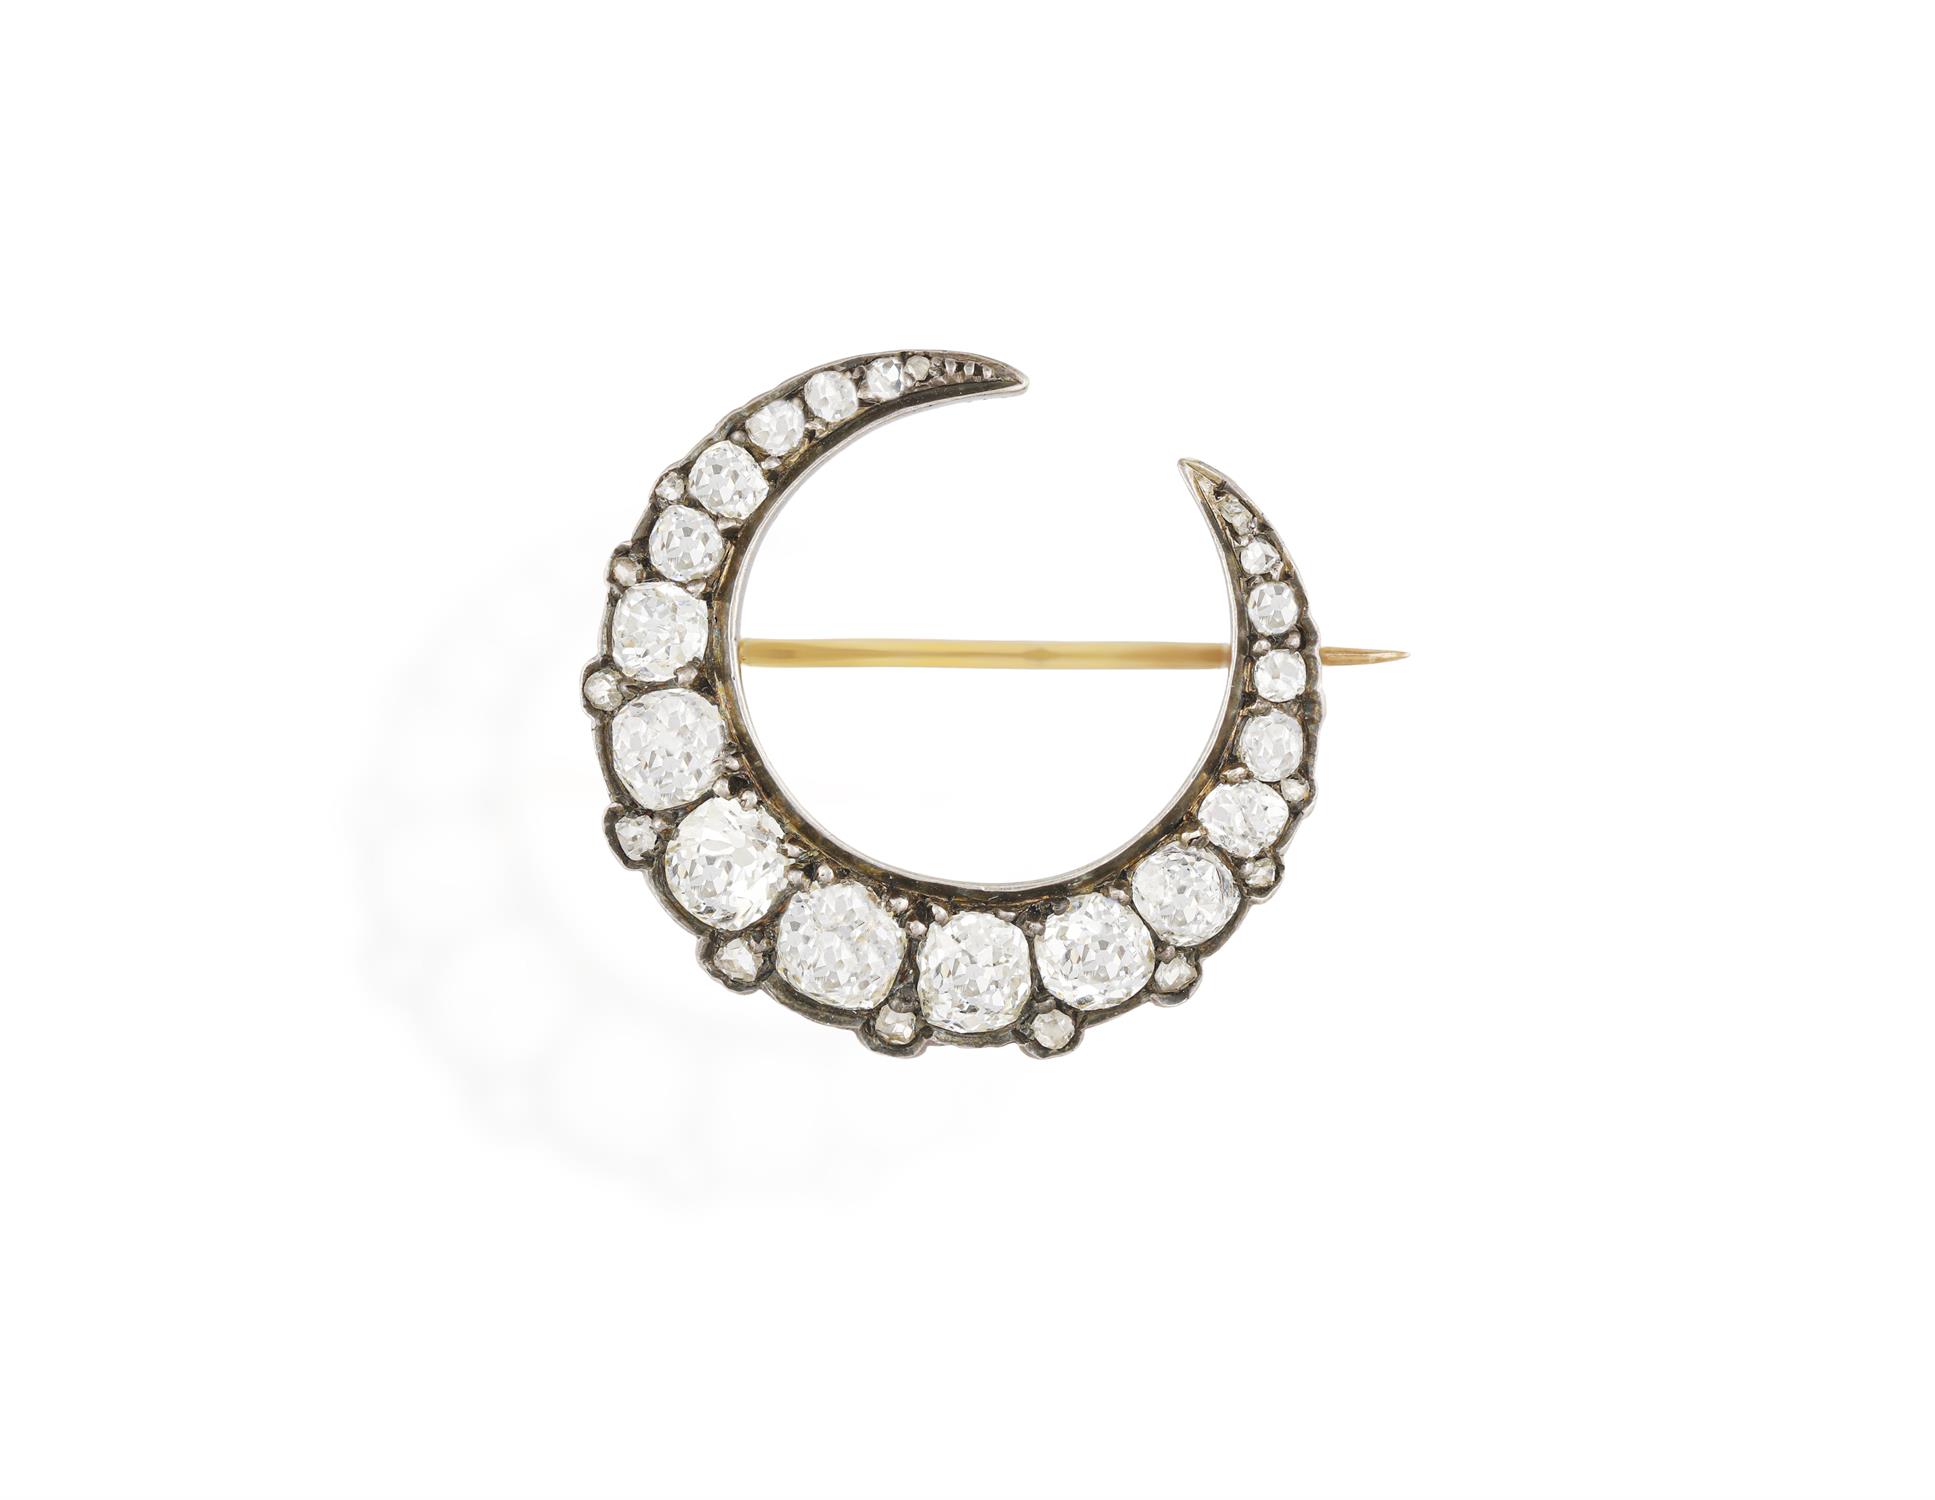 A LATE 19TH CENTURY DIAMOND BROOCH, CIRCA 1880 Of crescent design set with old cushion-shaped